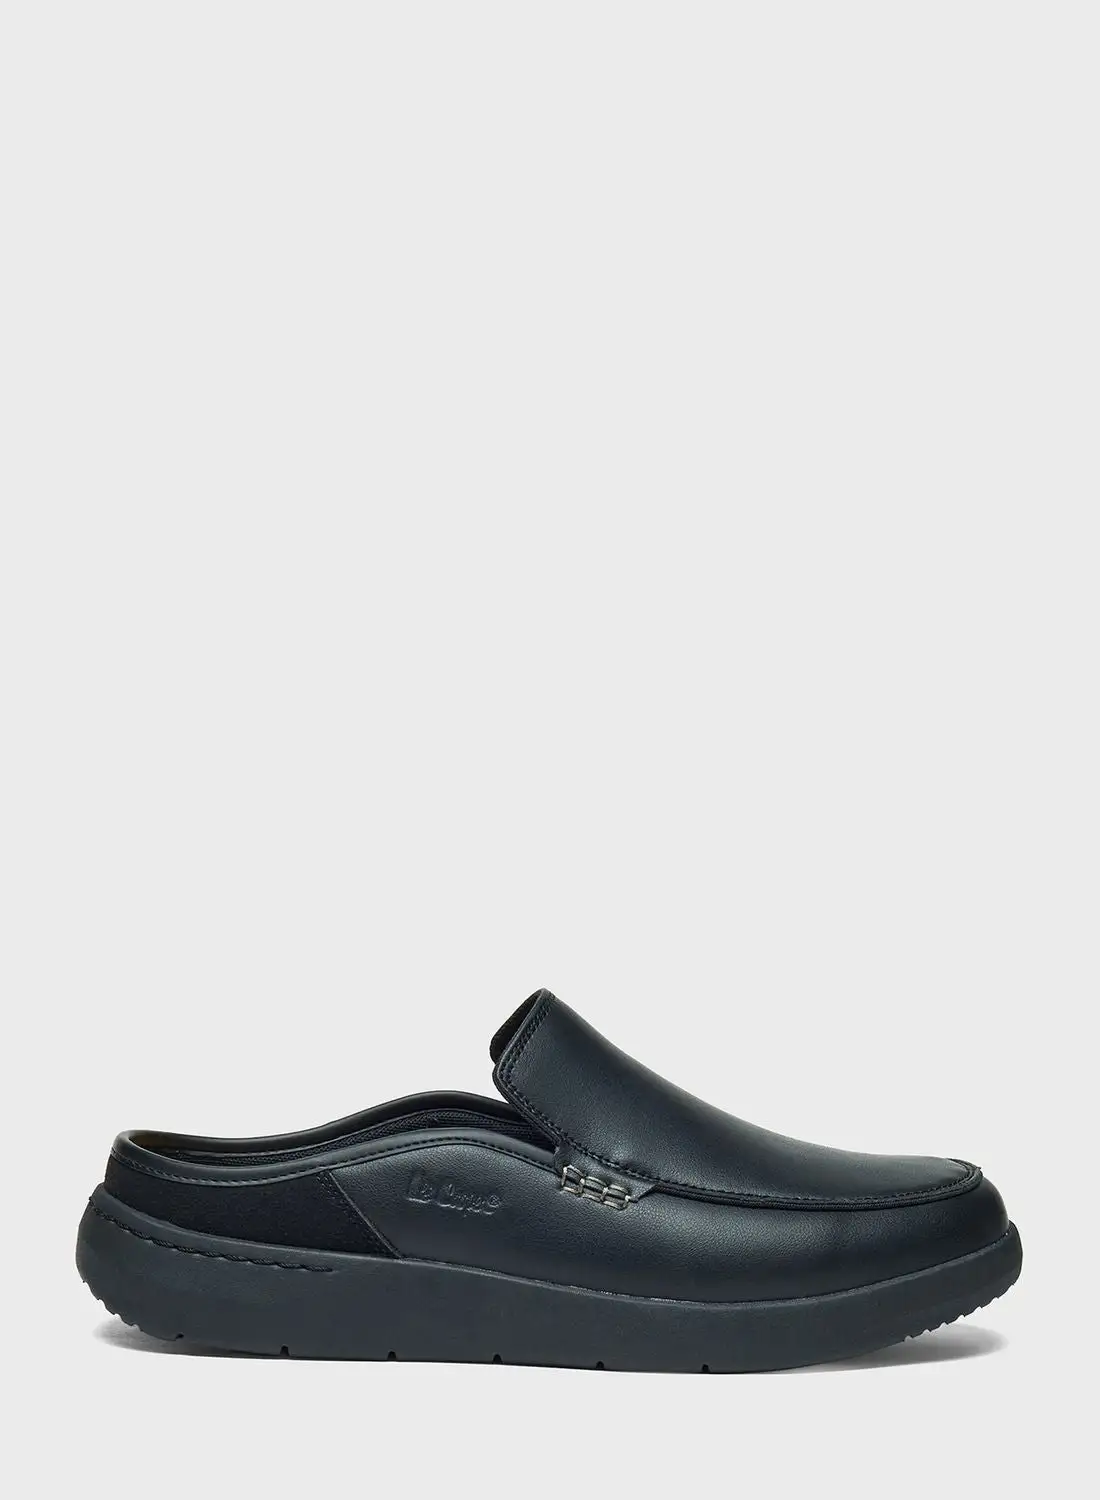 Lee Cooper Casual Slip On Loafers